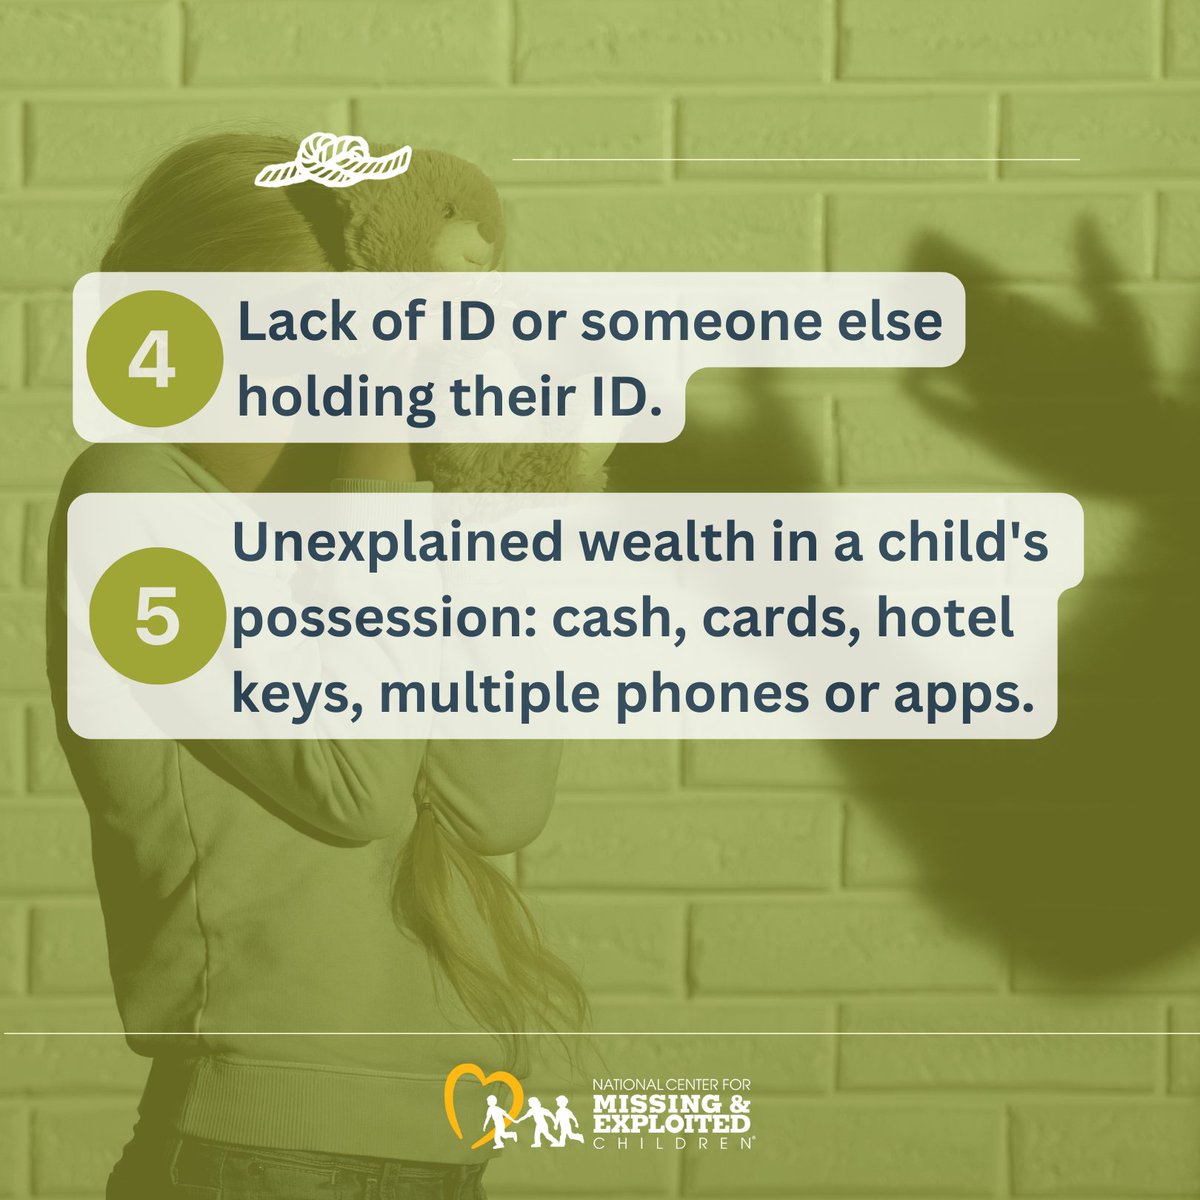 Be a hero in the fight against child sex trafficking! Contrary to common belief, it's not always hidden. Unfortunately, it often occurs right before our eyes. Watch out for signs in children you know; you could make a difference! #EndChildTrafficking #AwarenessMatters